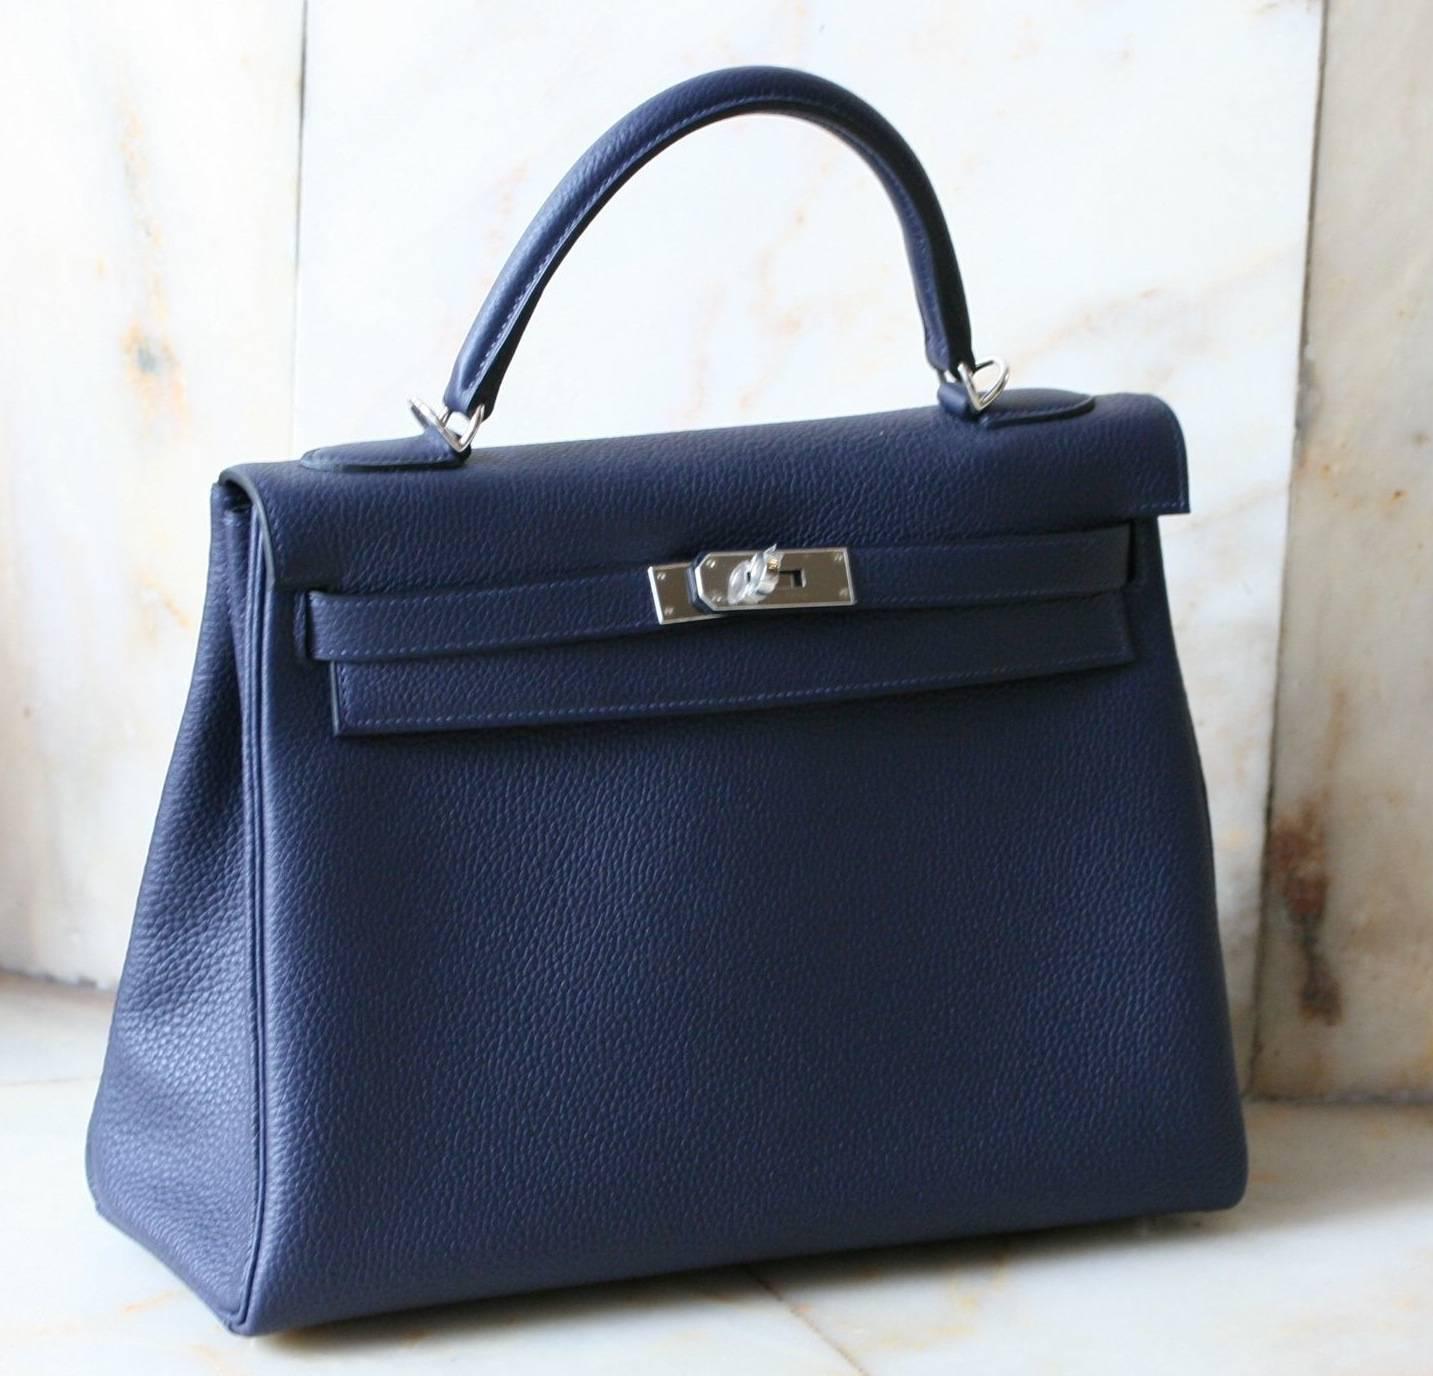 HERMES Kelly Bleu nuit togo '32 
Metal hardware, comes with complete packaging and accessories, original invoice.   Pristine, unworn condition
